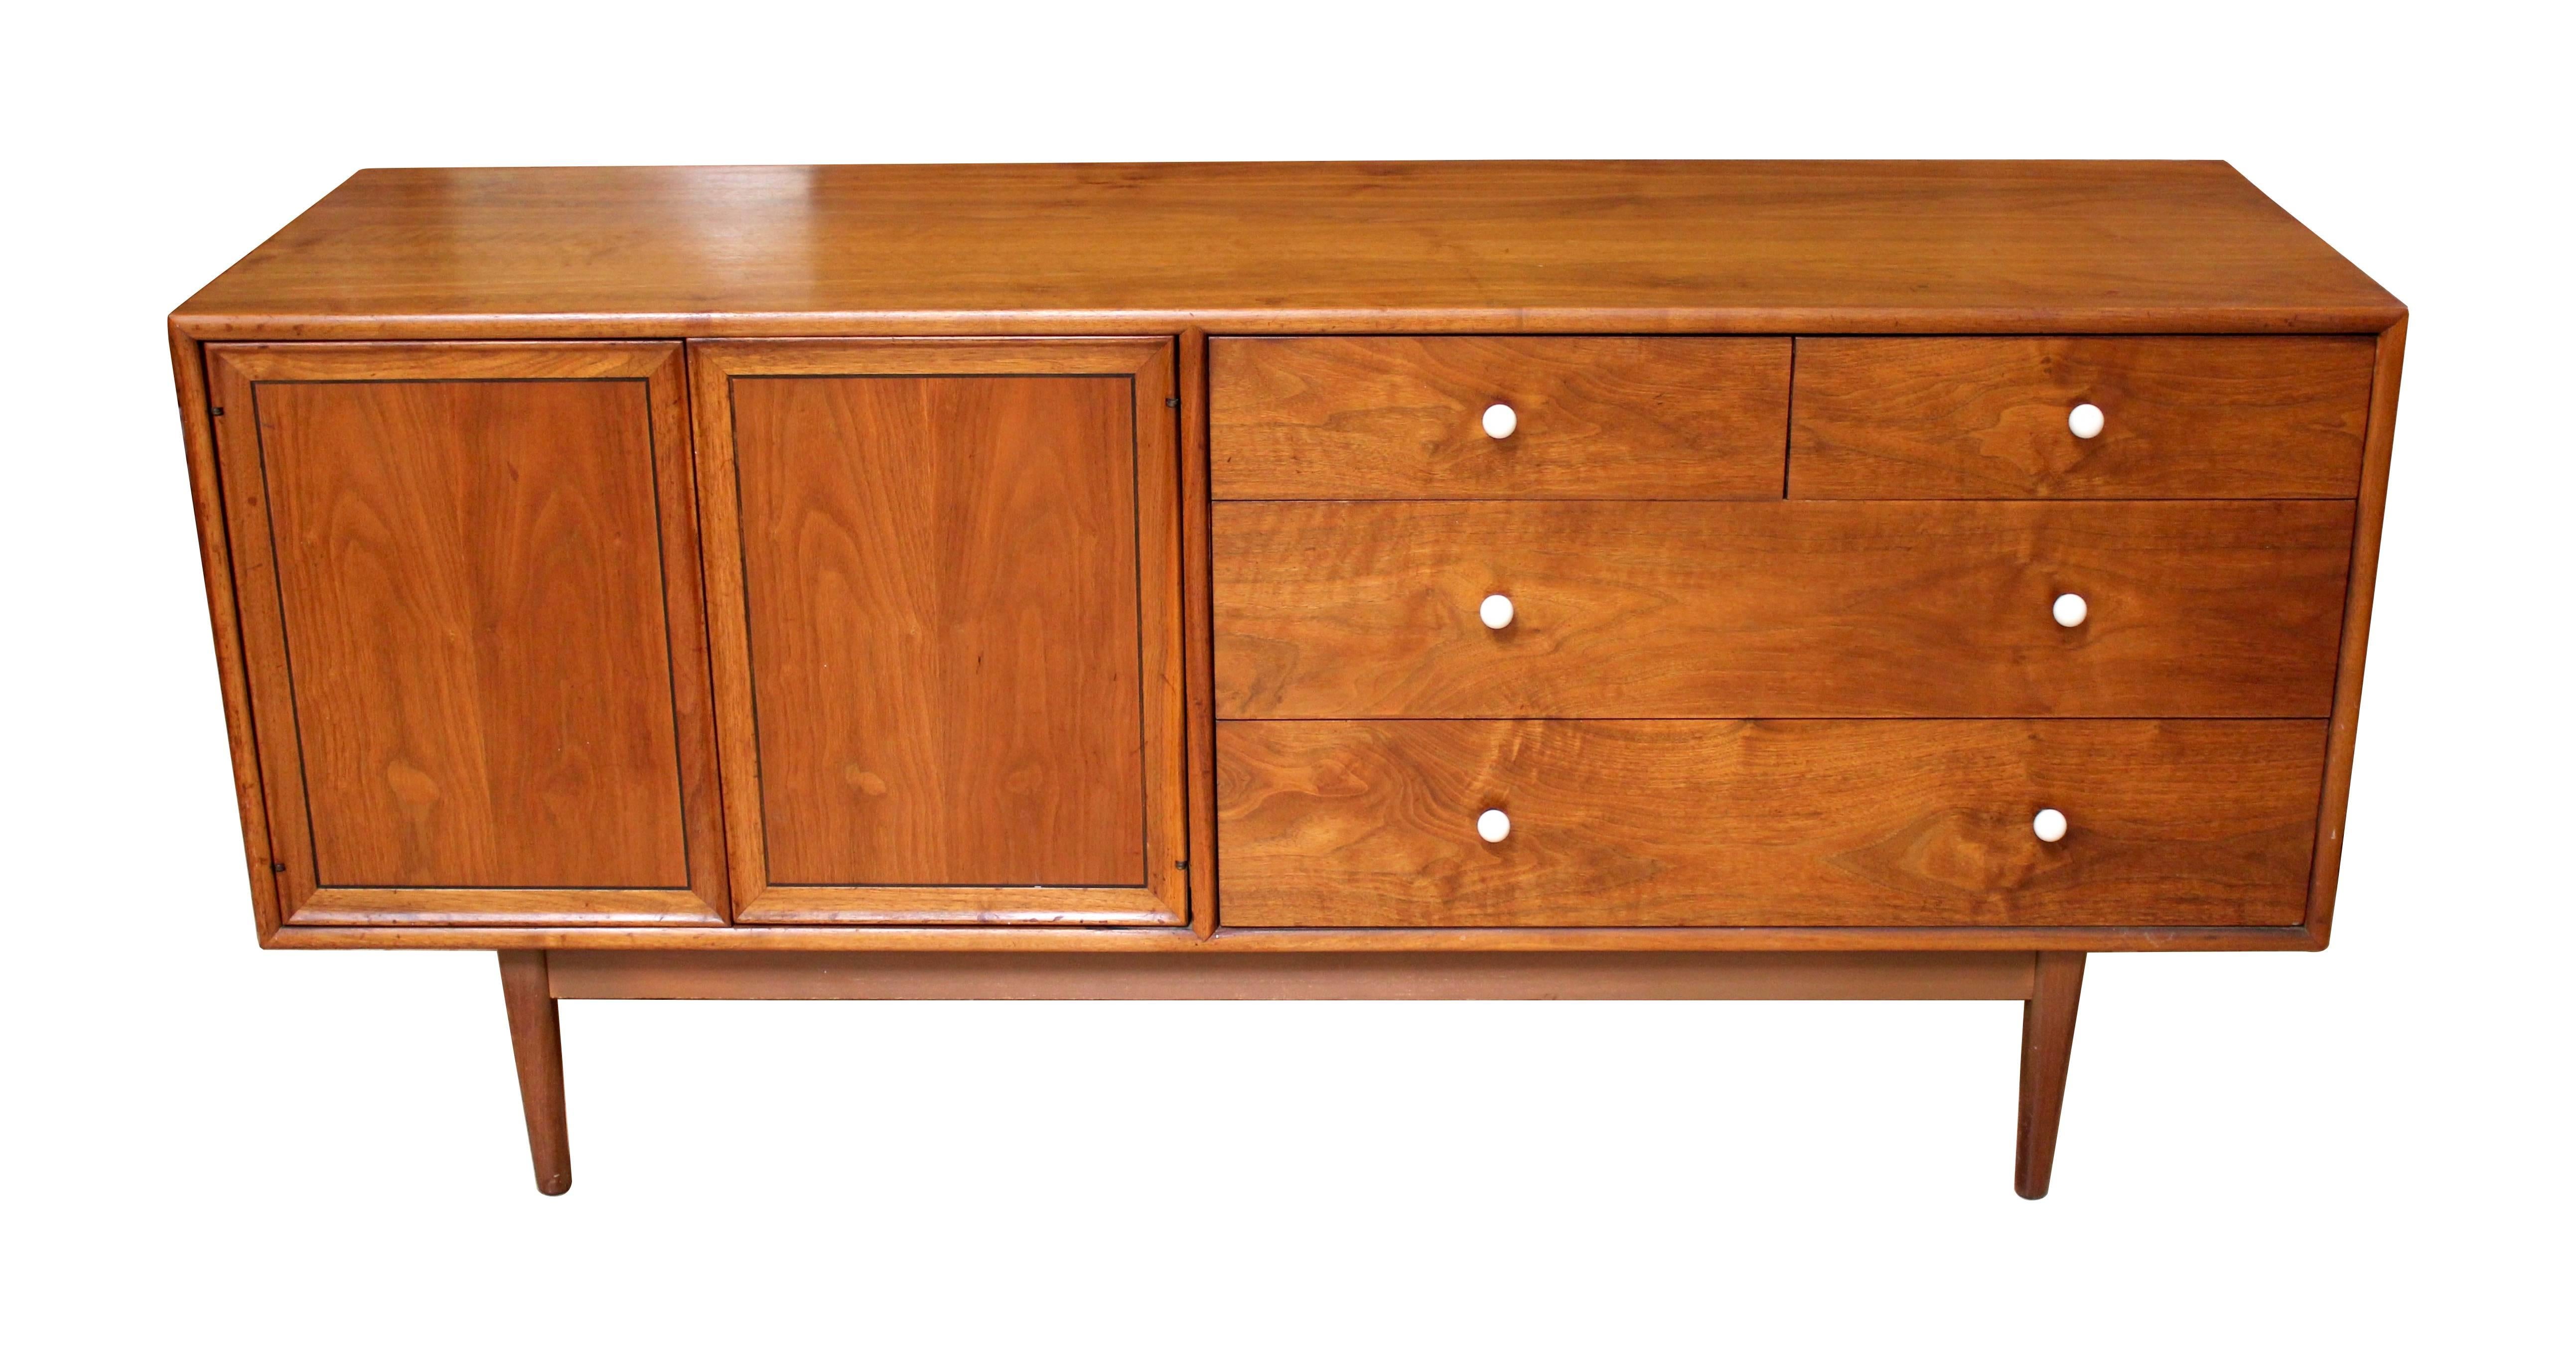 1960s walnut dresser designed by Kipp Stewart and Stewart McDougall for Drexel Declaration. The dresser features drawers on the right side, with a pair of cabinet doors on the left concealing additional drawers. Beautiful walnut wood grain and the